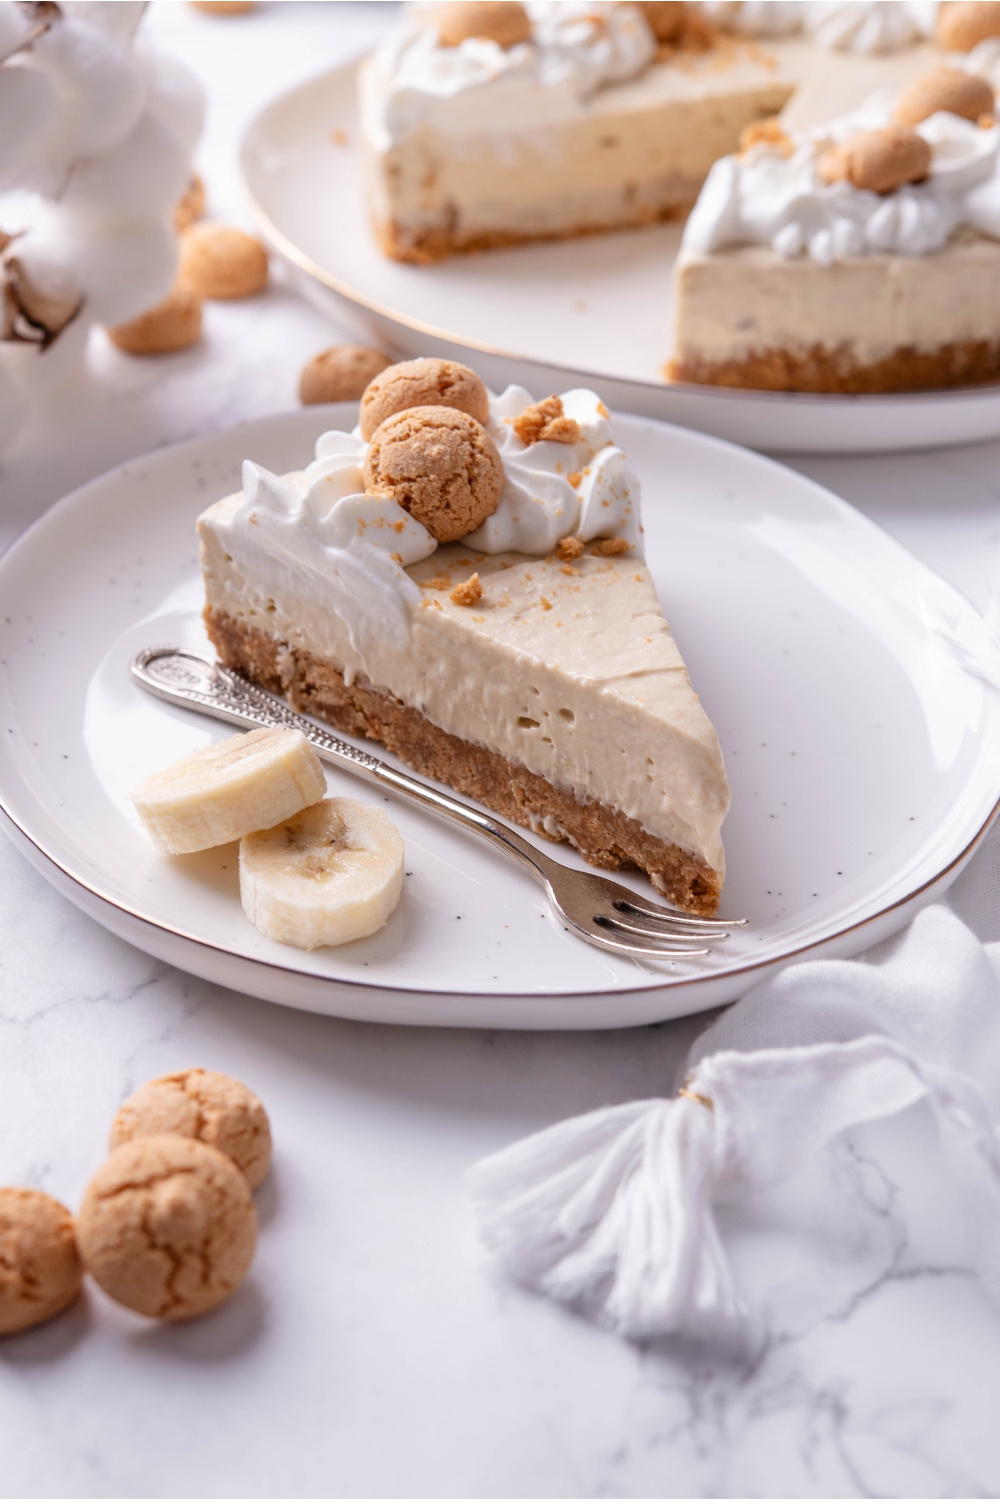 A serving of banana cheesecake on a plate with two banana slices and a fork. The cheesecake has a cookie crust and is topped with whipped cream and mini cookies.